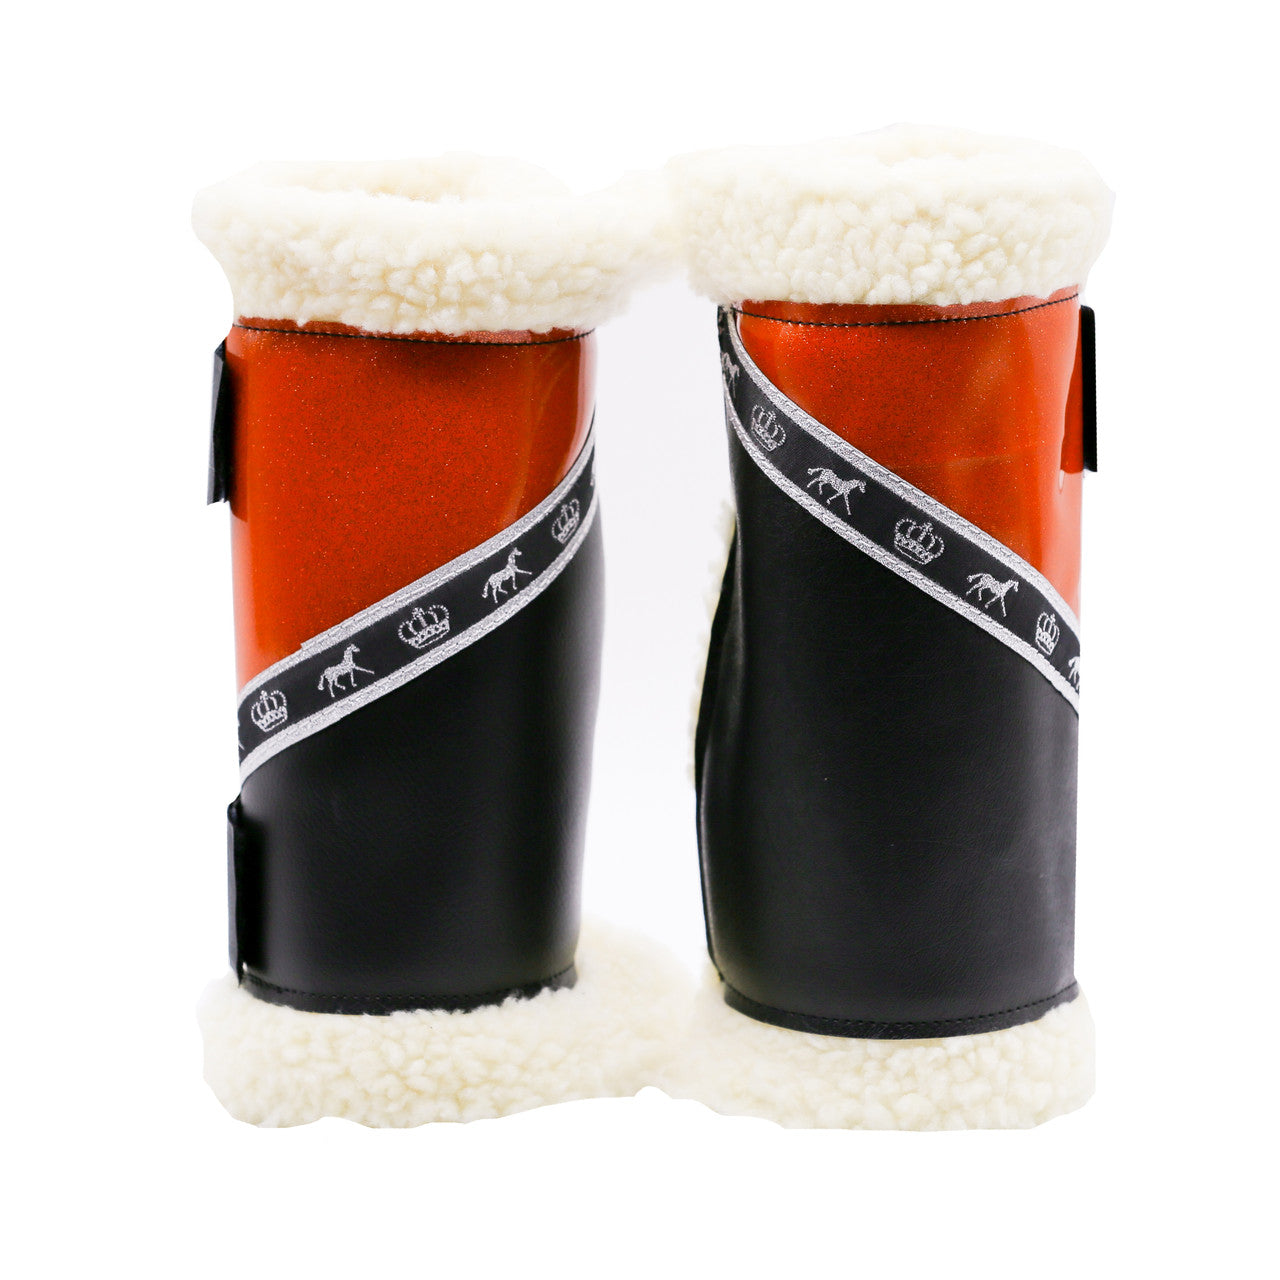 Sherpa Boots - Glitter Orange & Black - Pair - Made to order